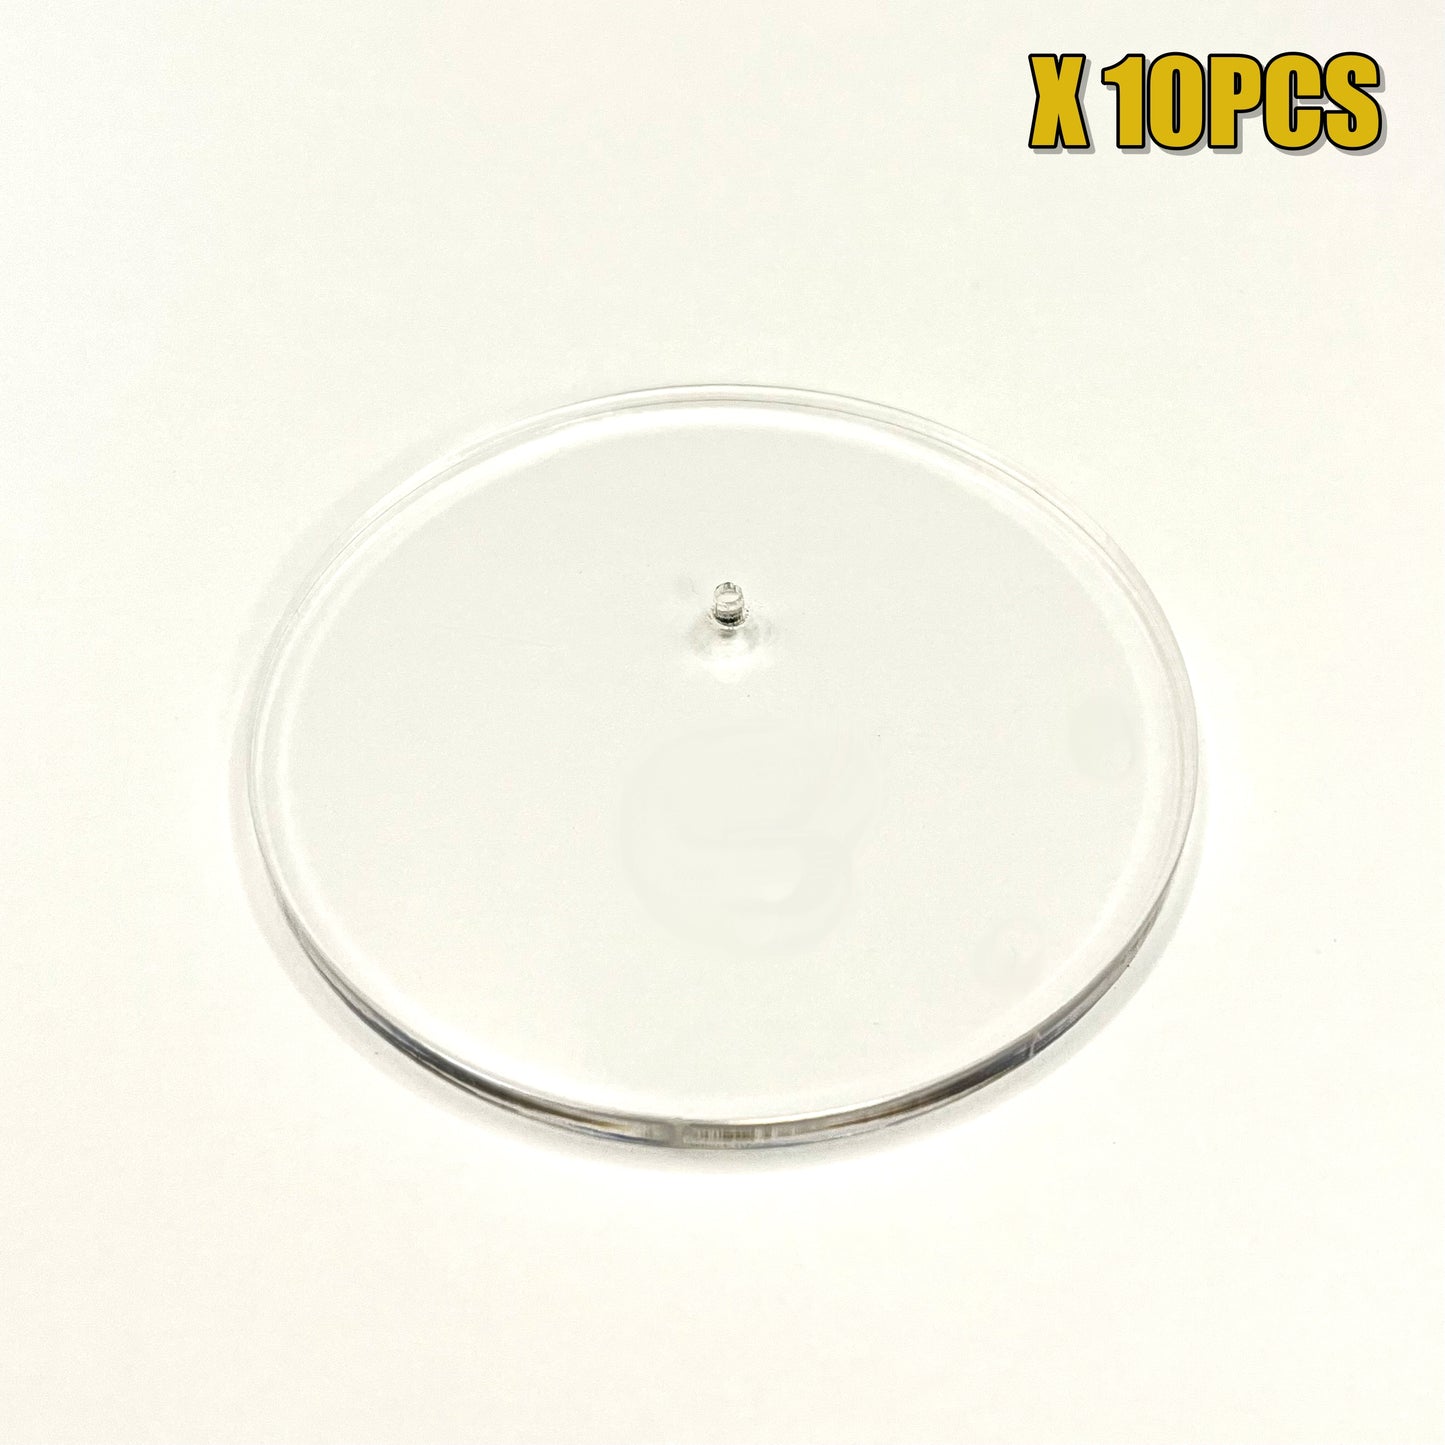 LT Cave 10pcs Acrylic Display Stand Base Plate for Action Figure (Clear)